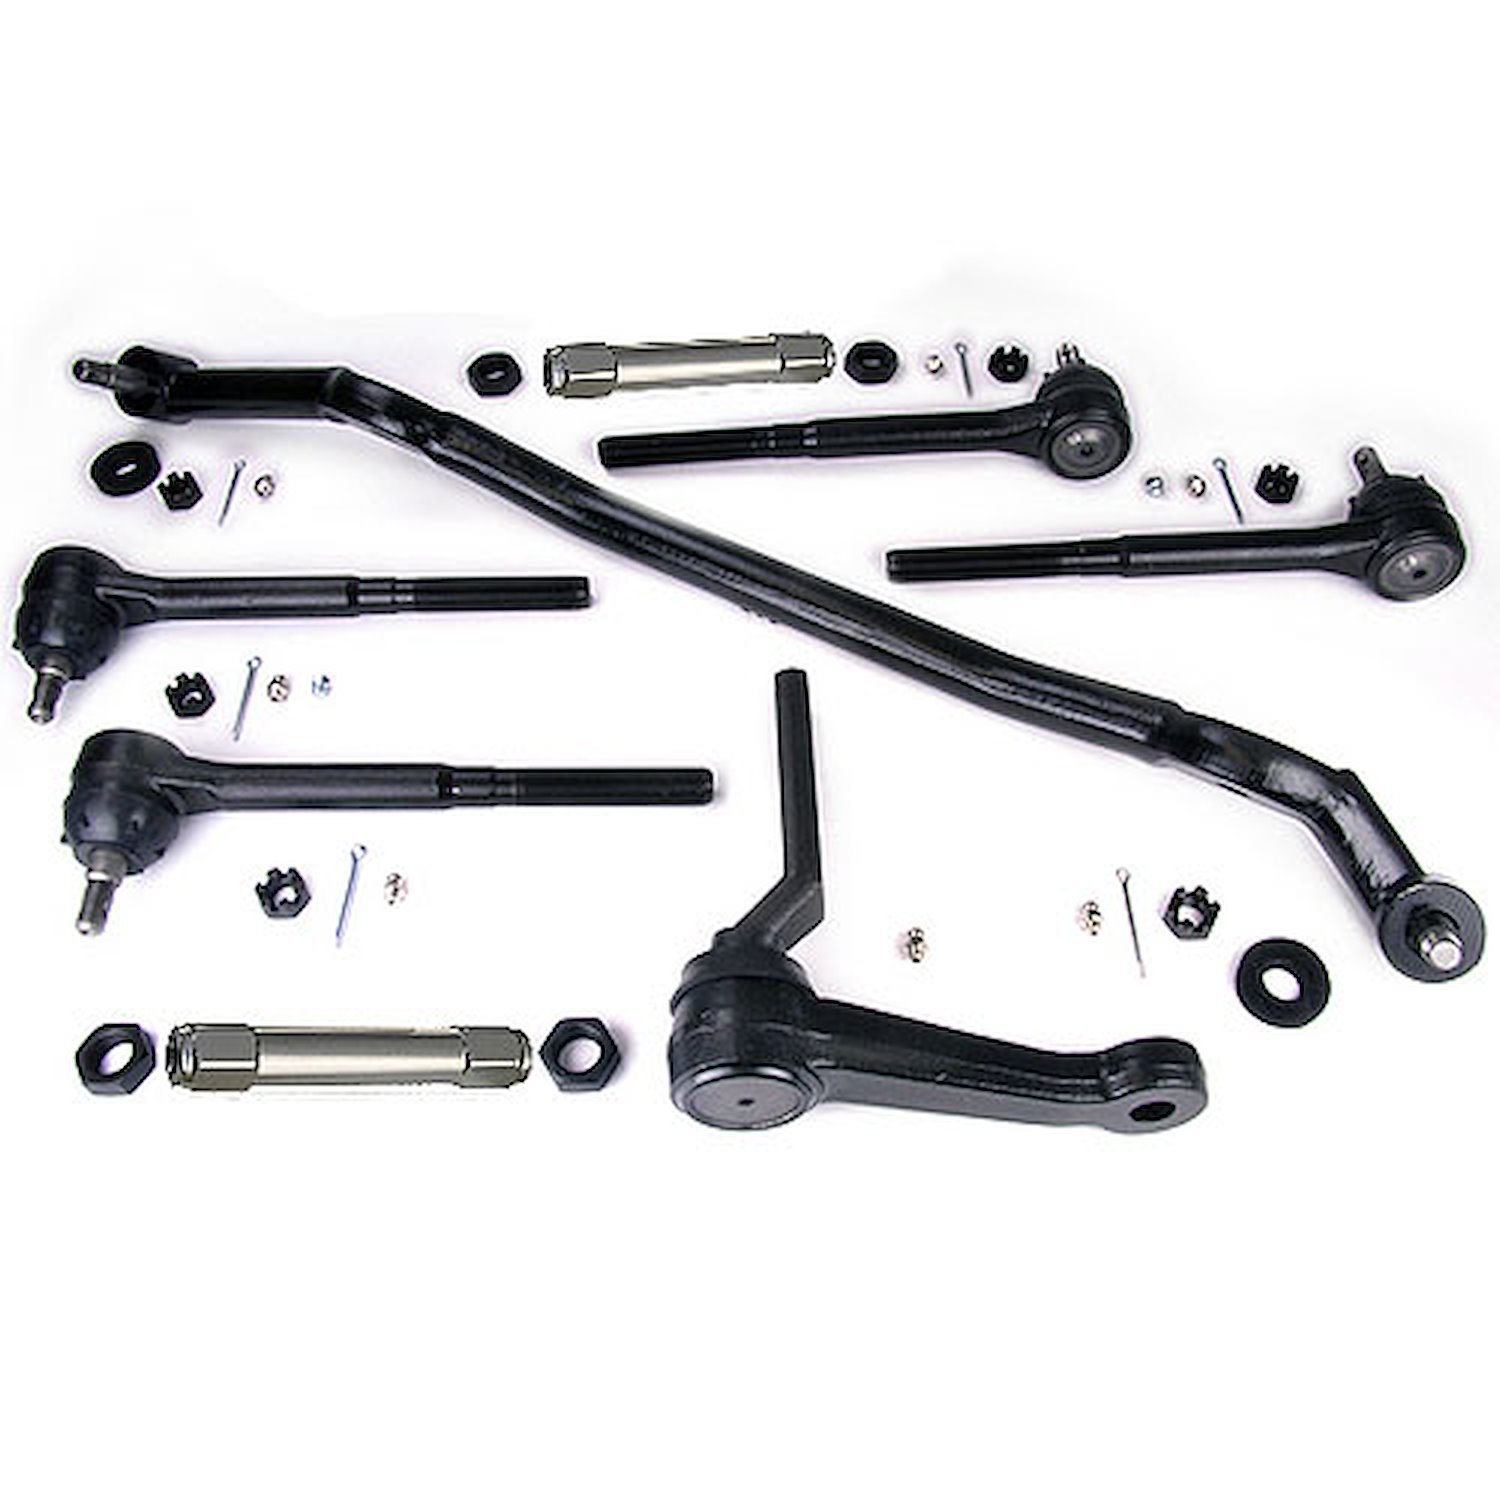 11249570 Steering Linkage Kit Fits Select 1968-1970 GM A-Body Models